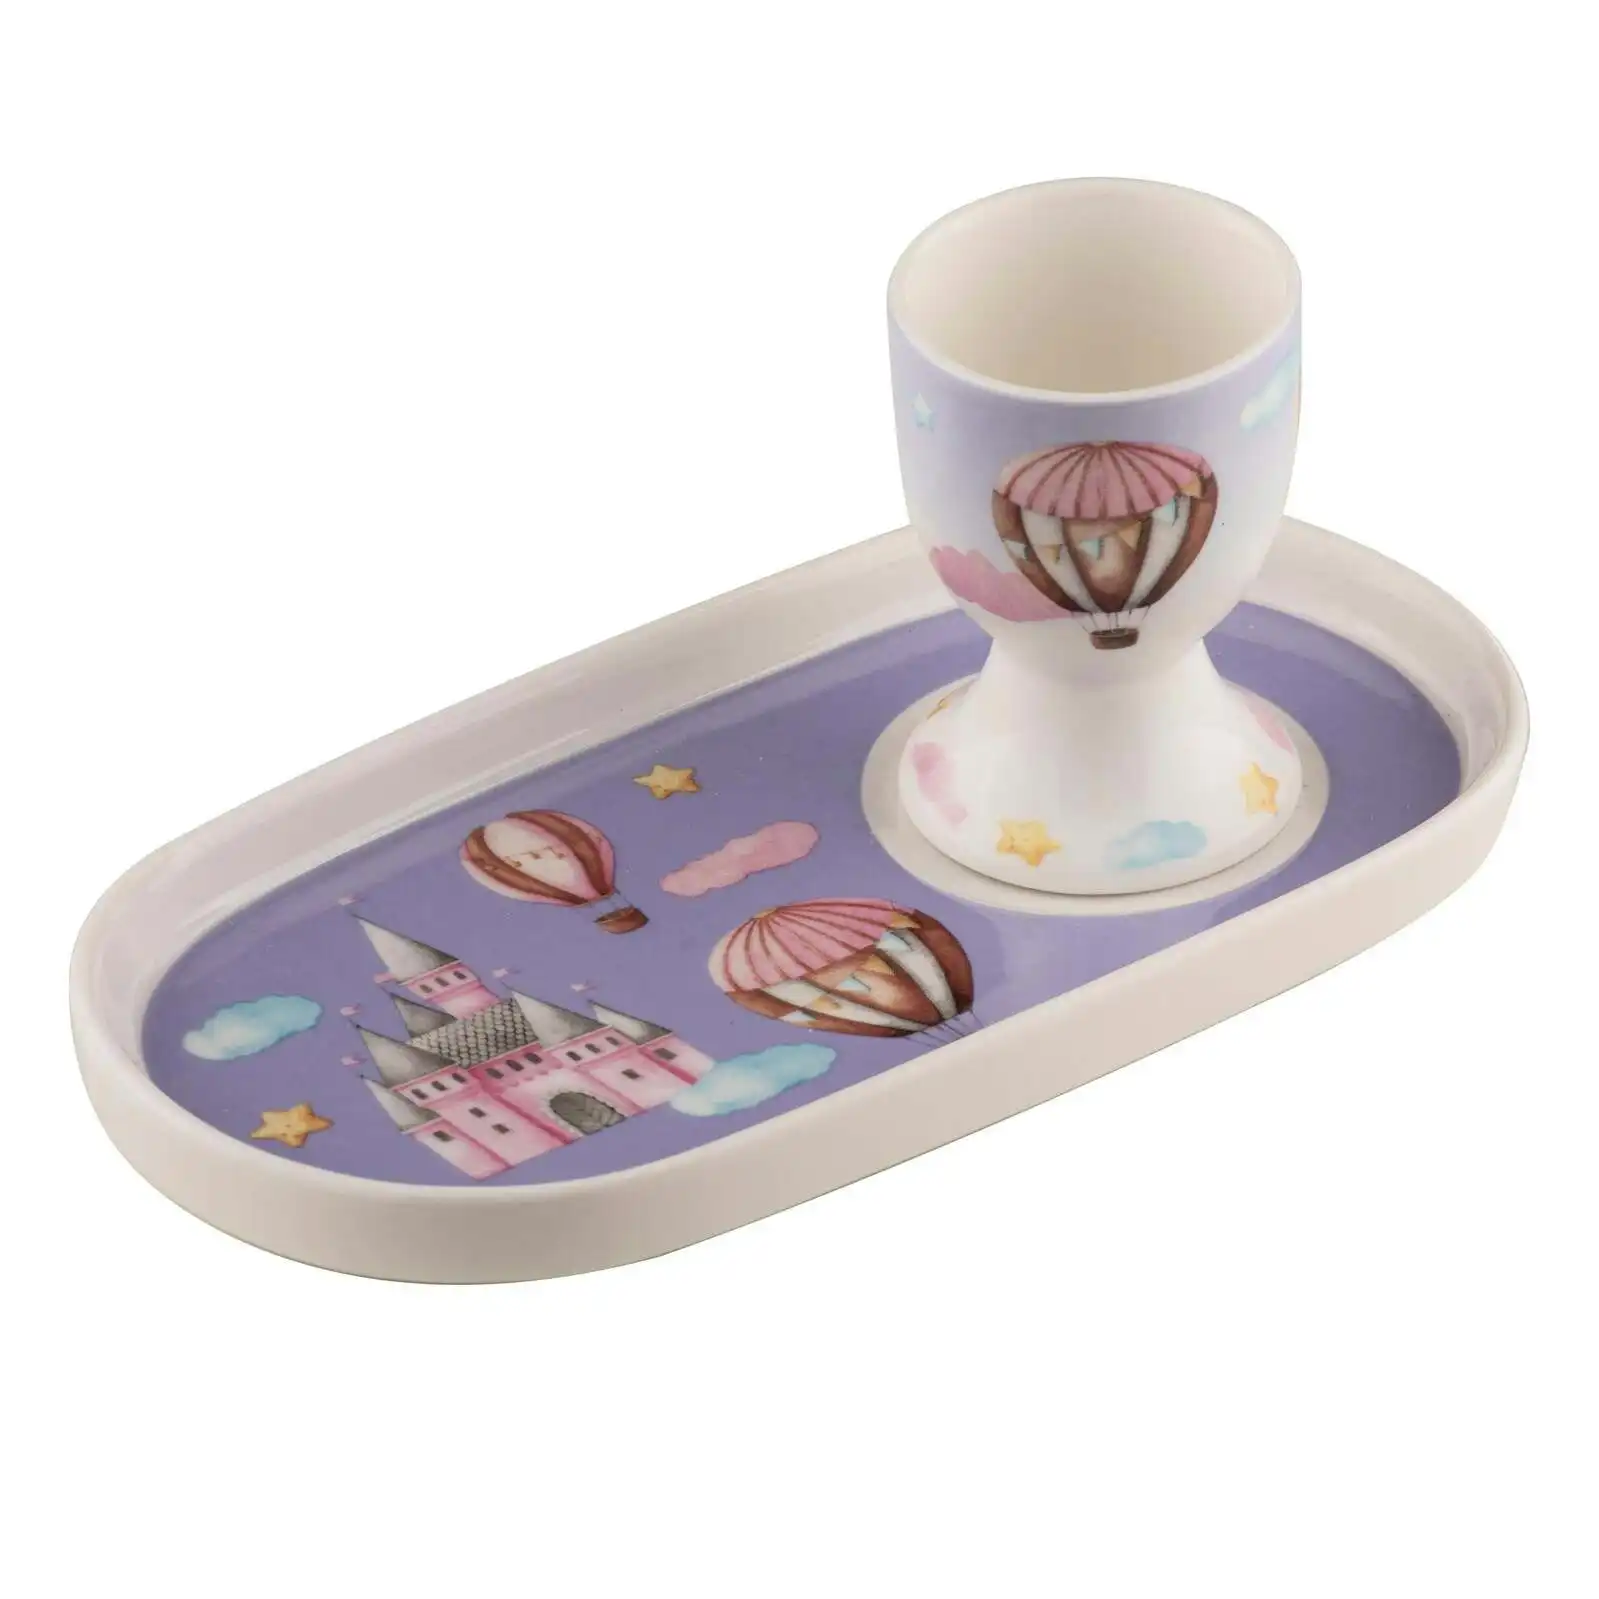 Ashdene Up In The Sky Soldier Kids New Bone China Egg Cup/Snack/Dinner Plate Set